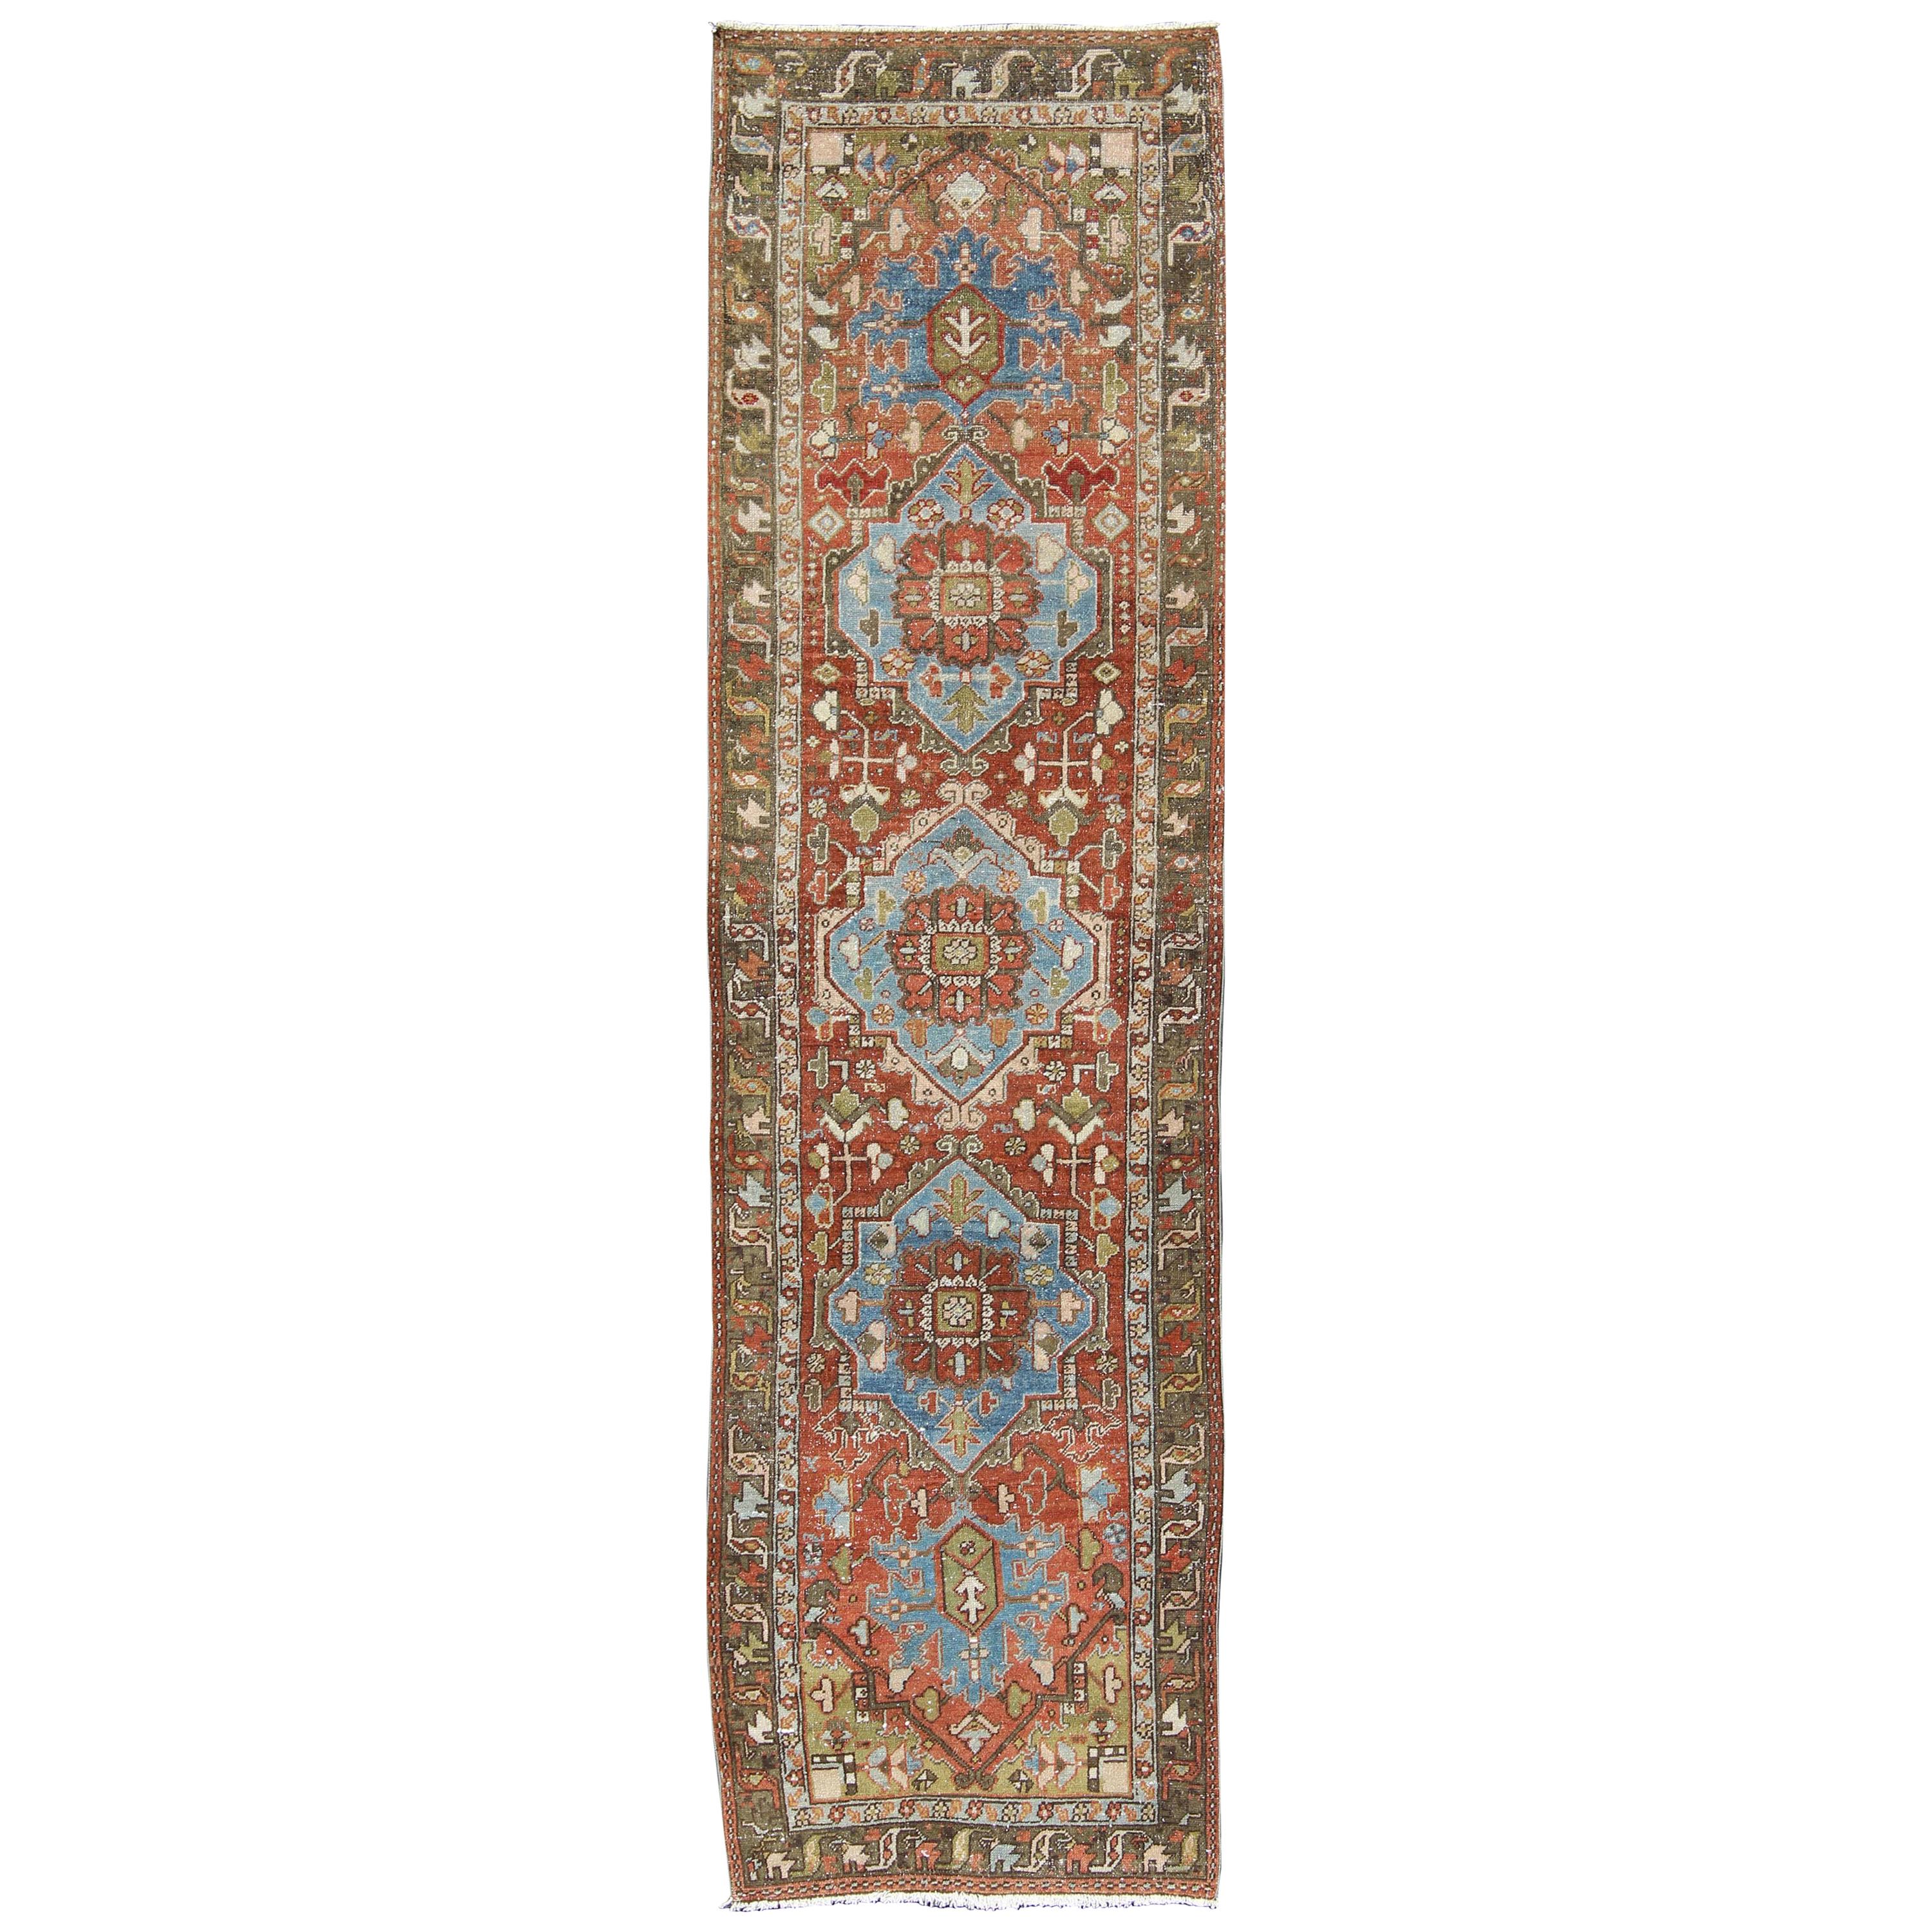 Antique Persian Heriz Runner with Geometric Medallion Design in Red, Olive, Blue